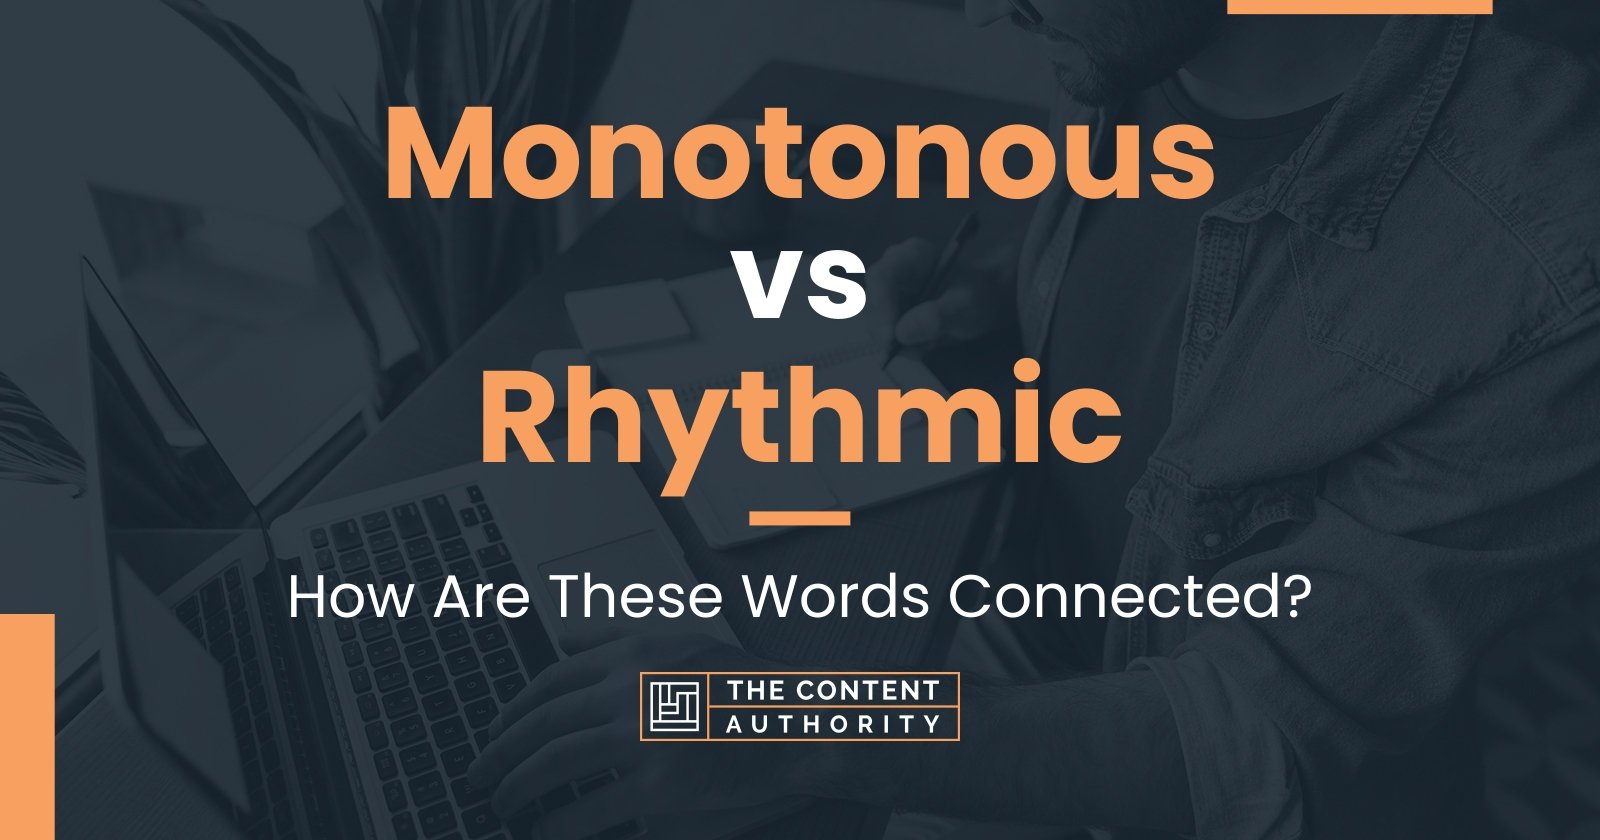 Monotonous vs Rhythmic: How Are These Words Connected?